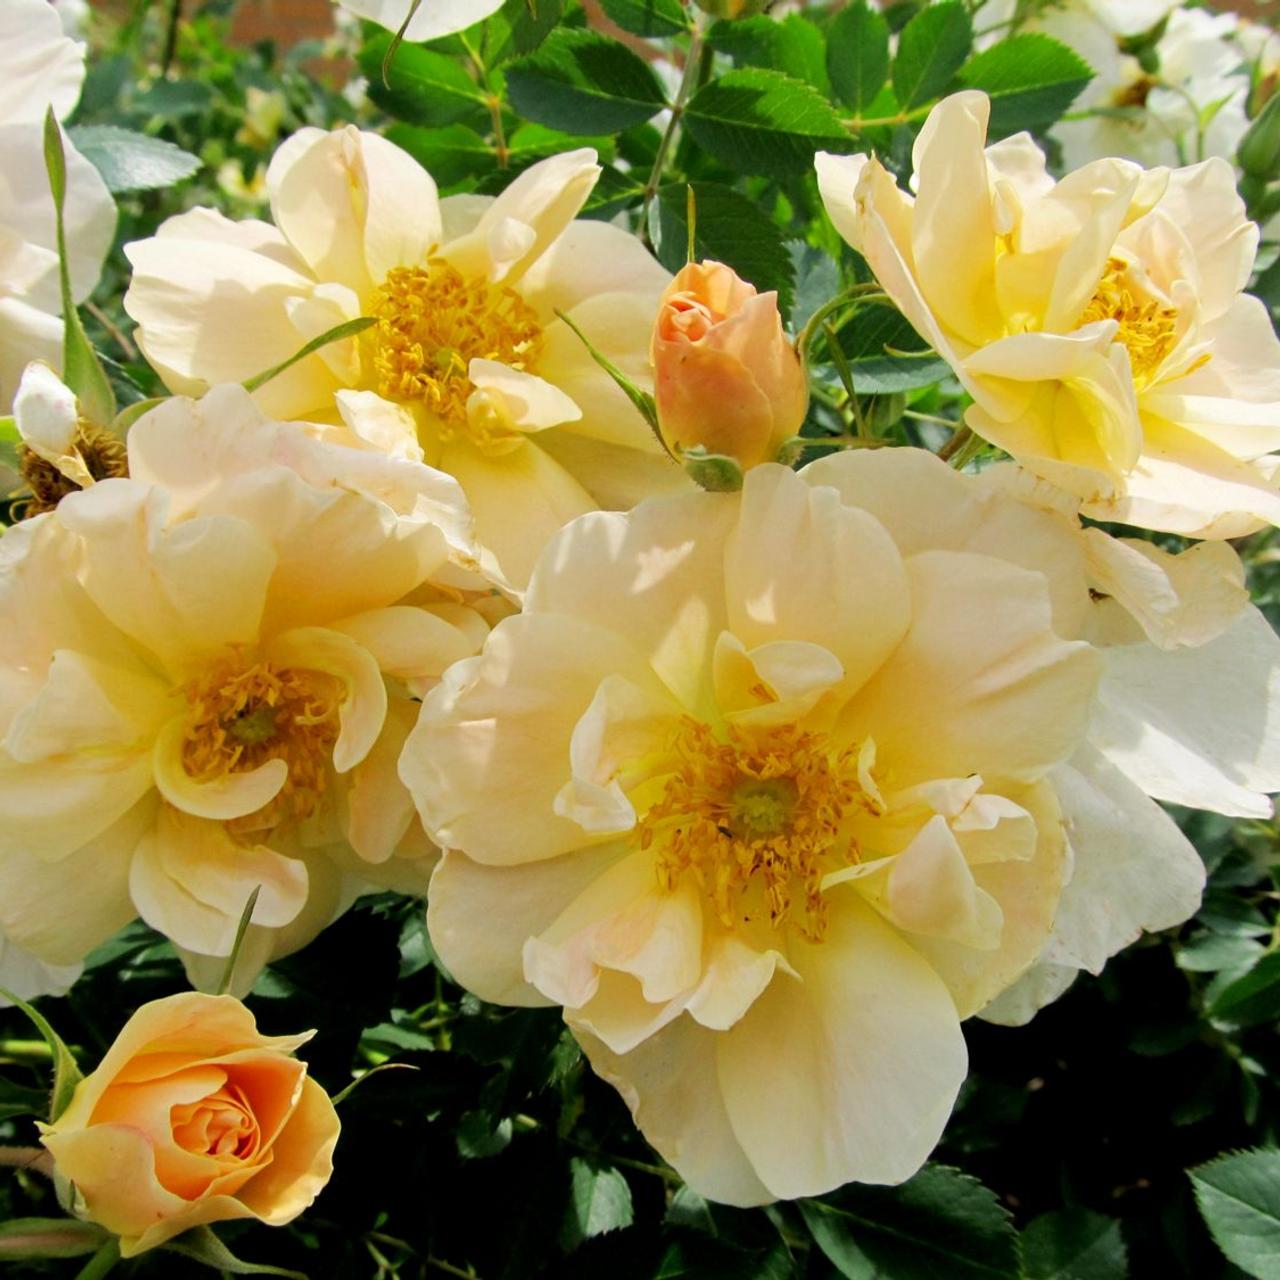 Rosa 'Above and Beyond' plant